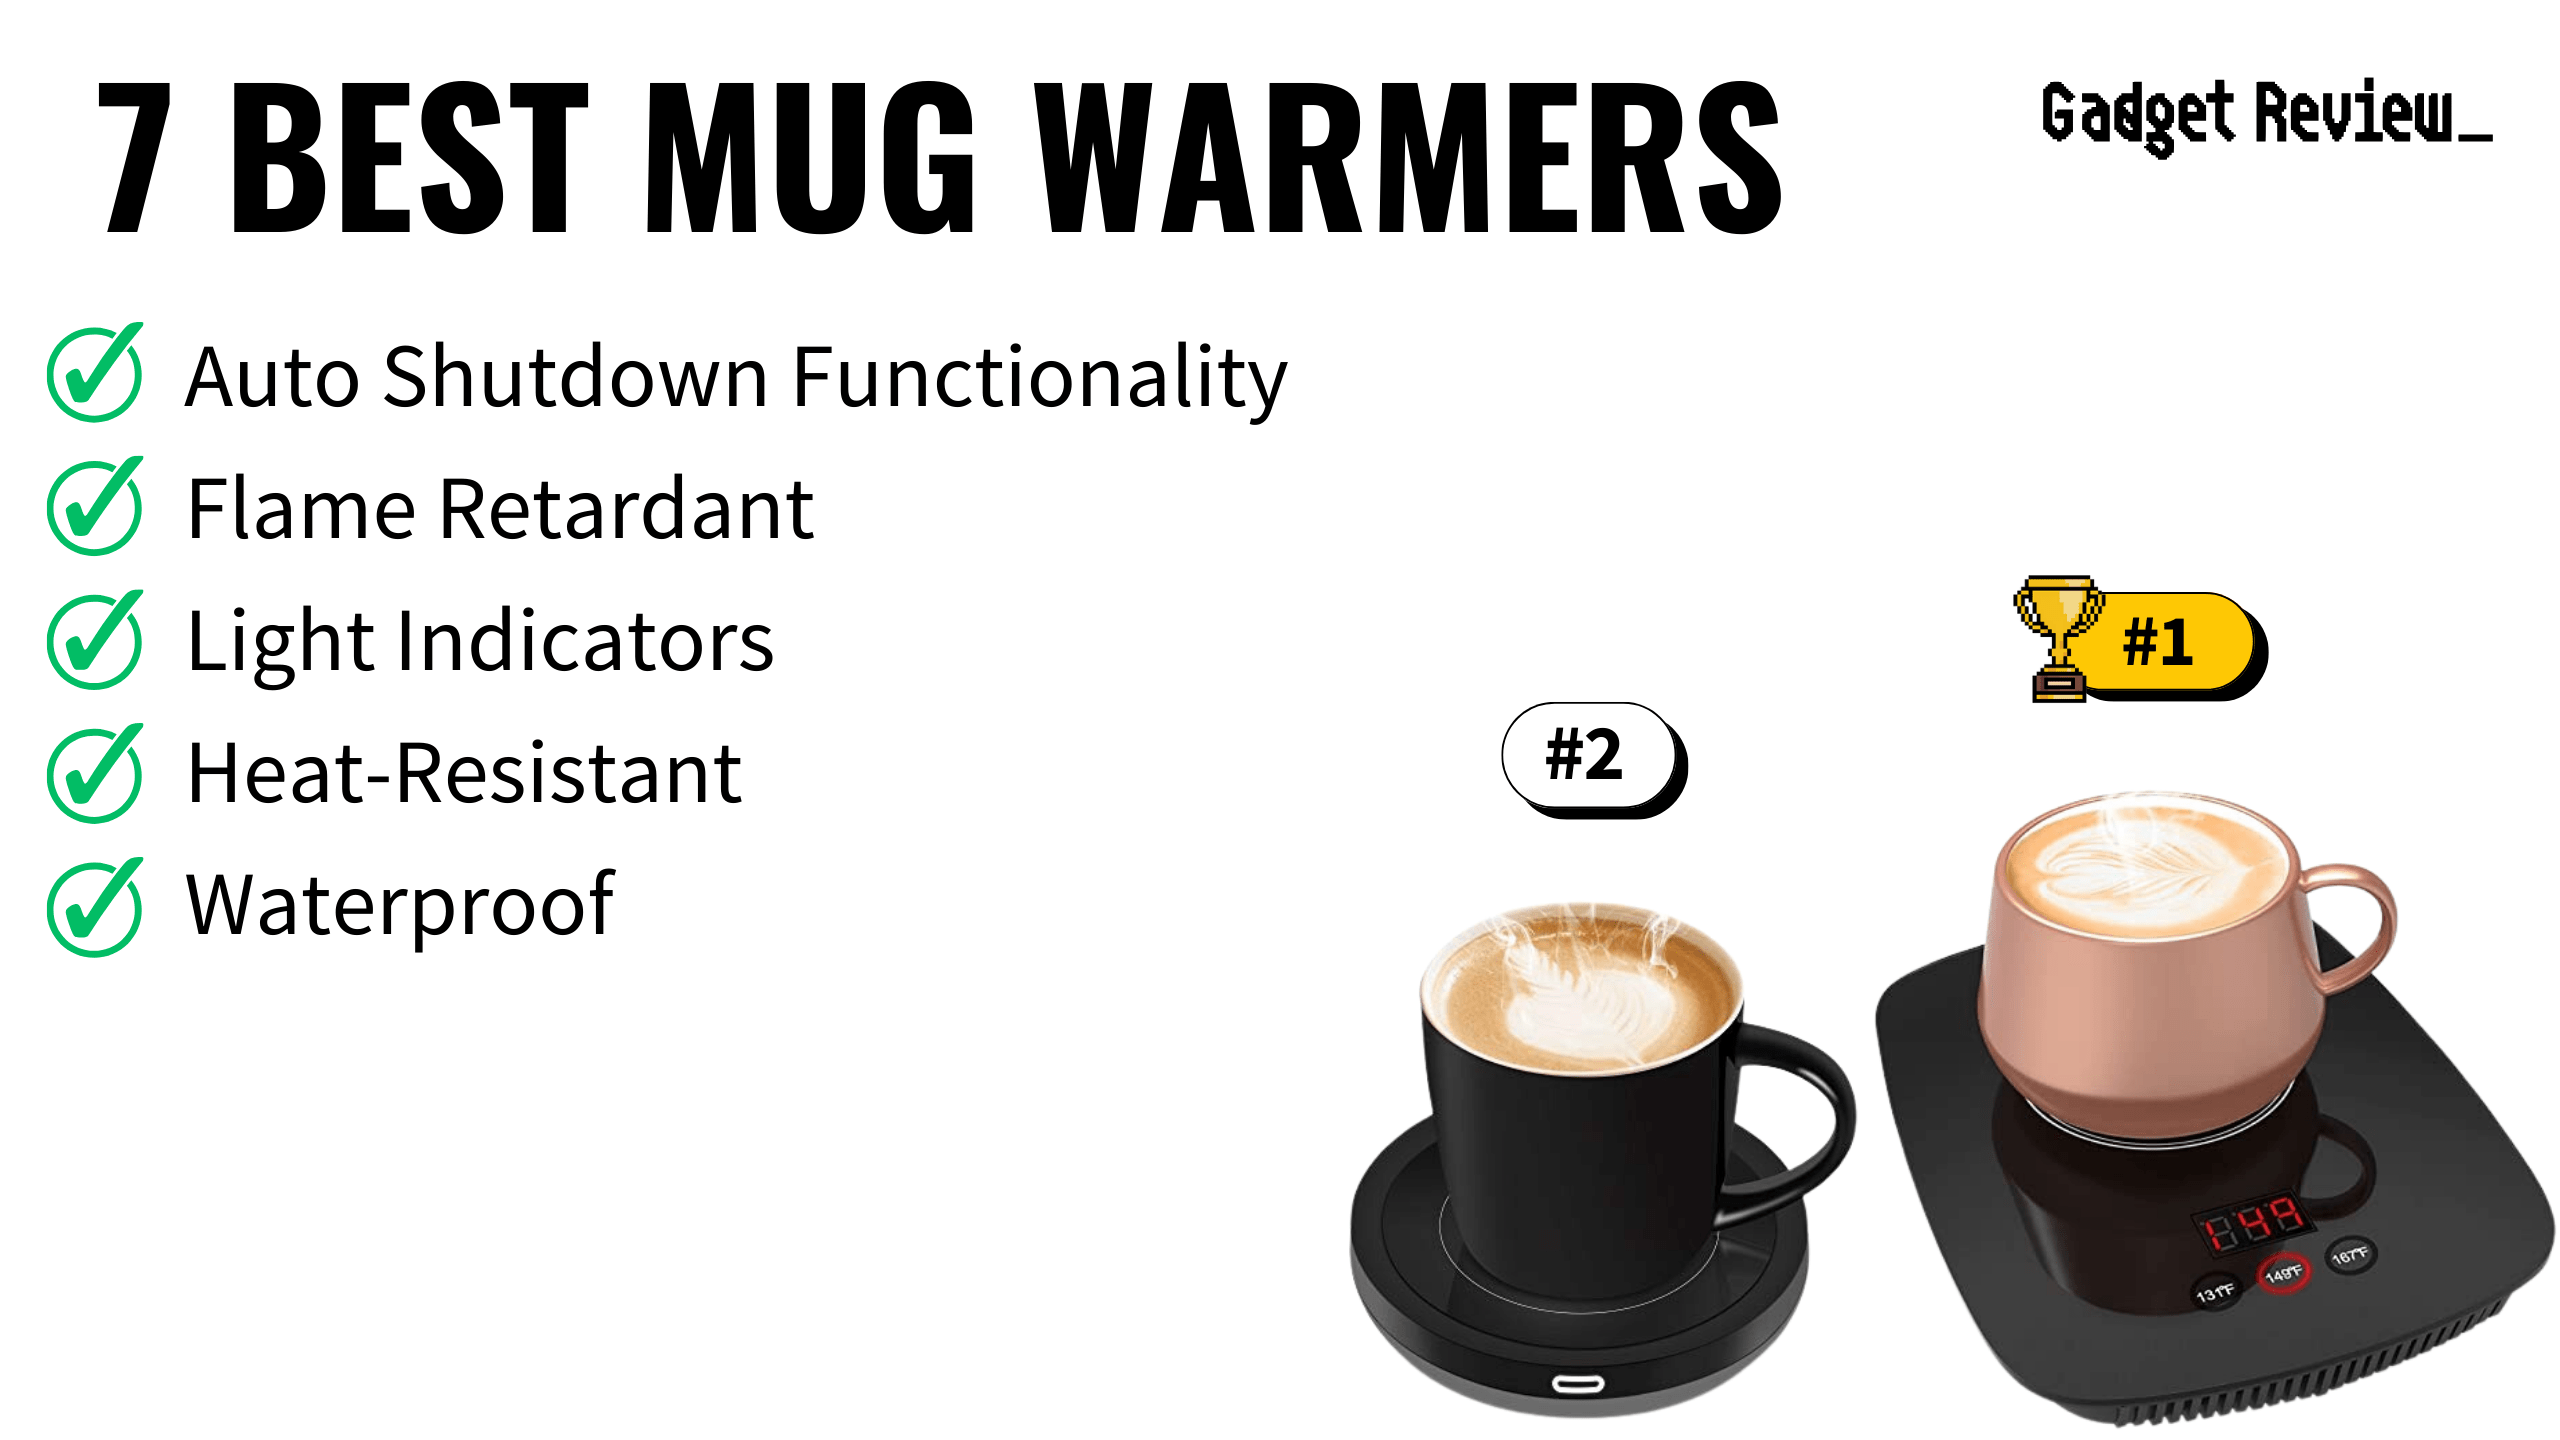 best mug warmer featured image that shows the top three best kitchen product models